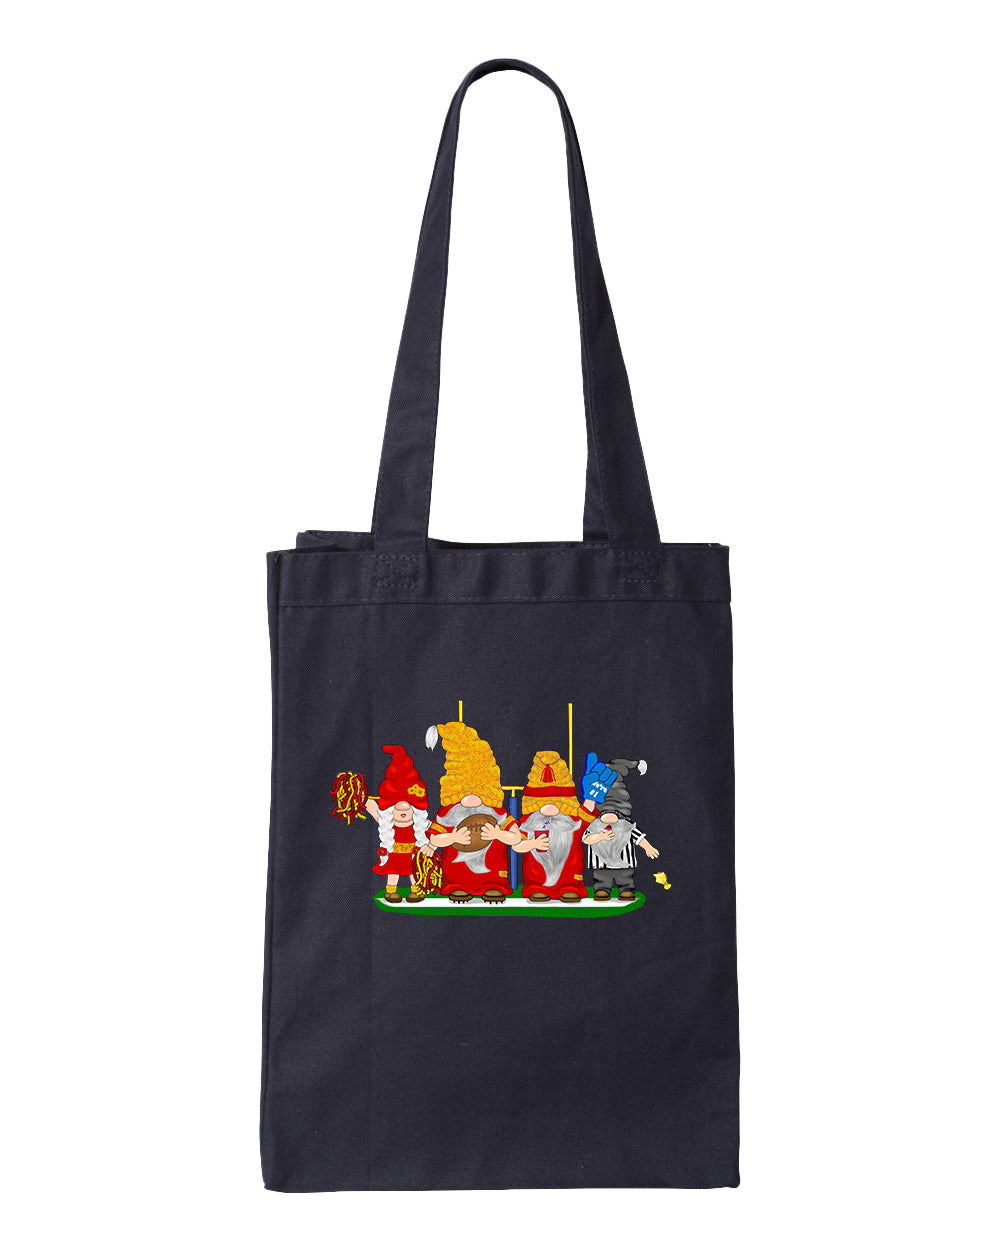 Red & Gold Football Gnomes  (similar to Kansas City) on Gusset Tote